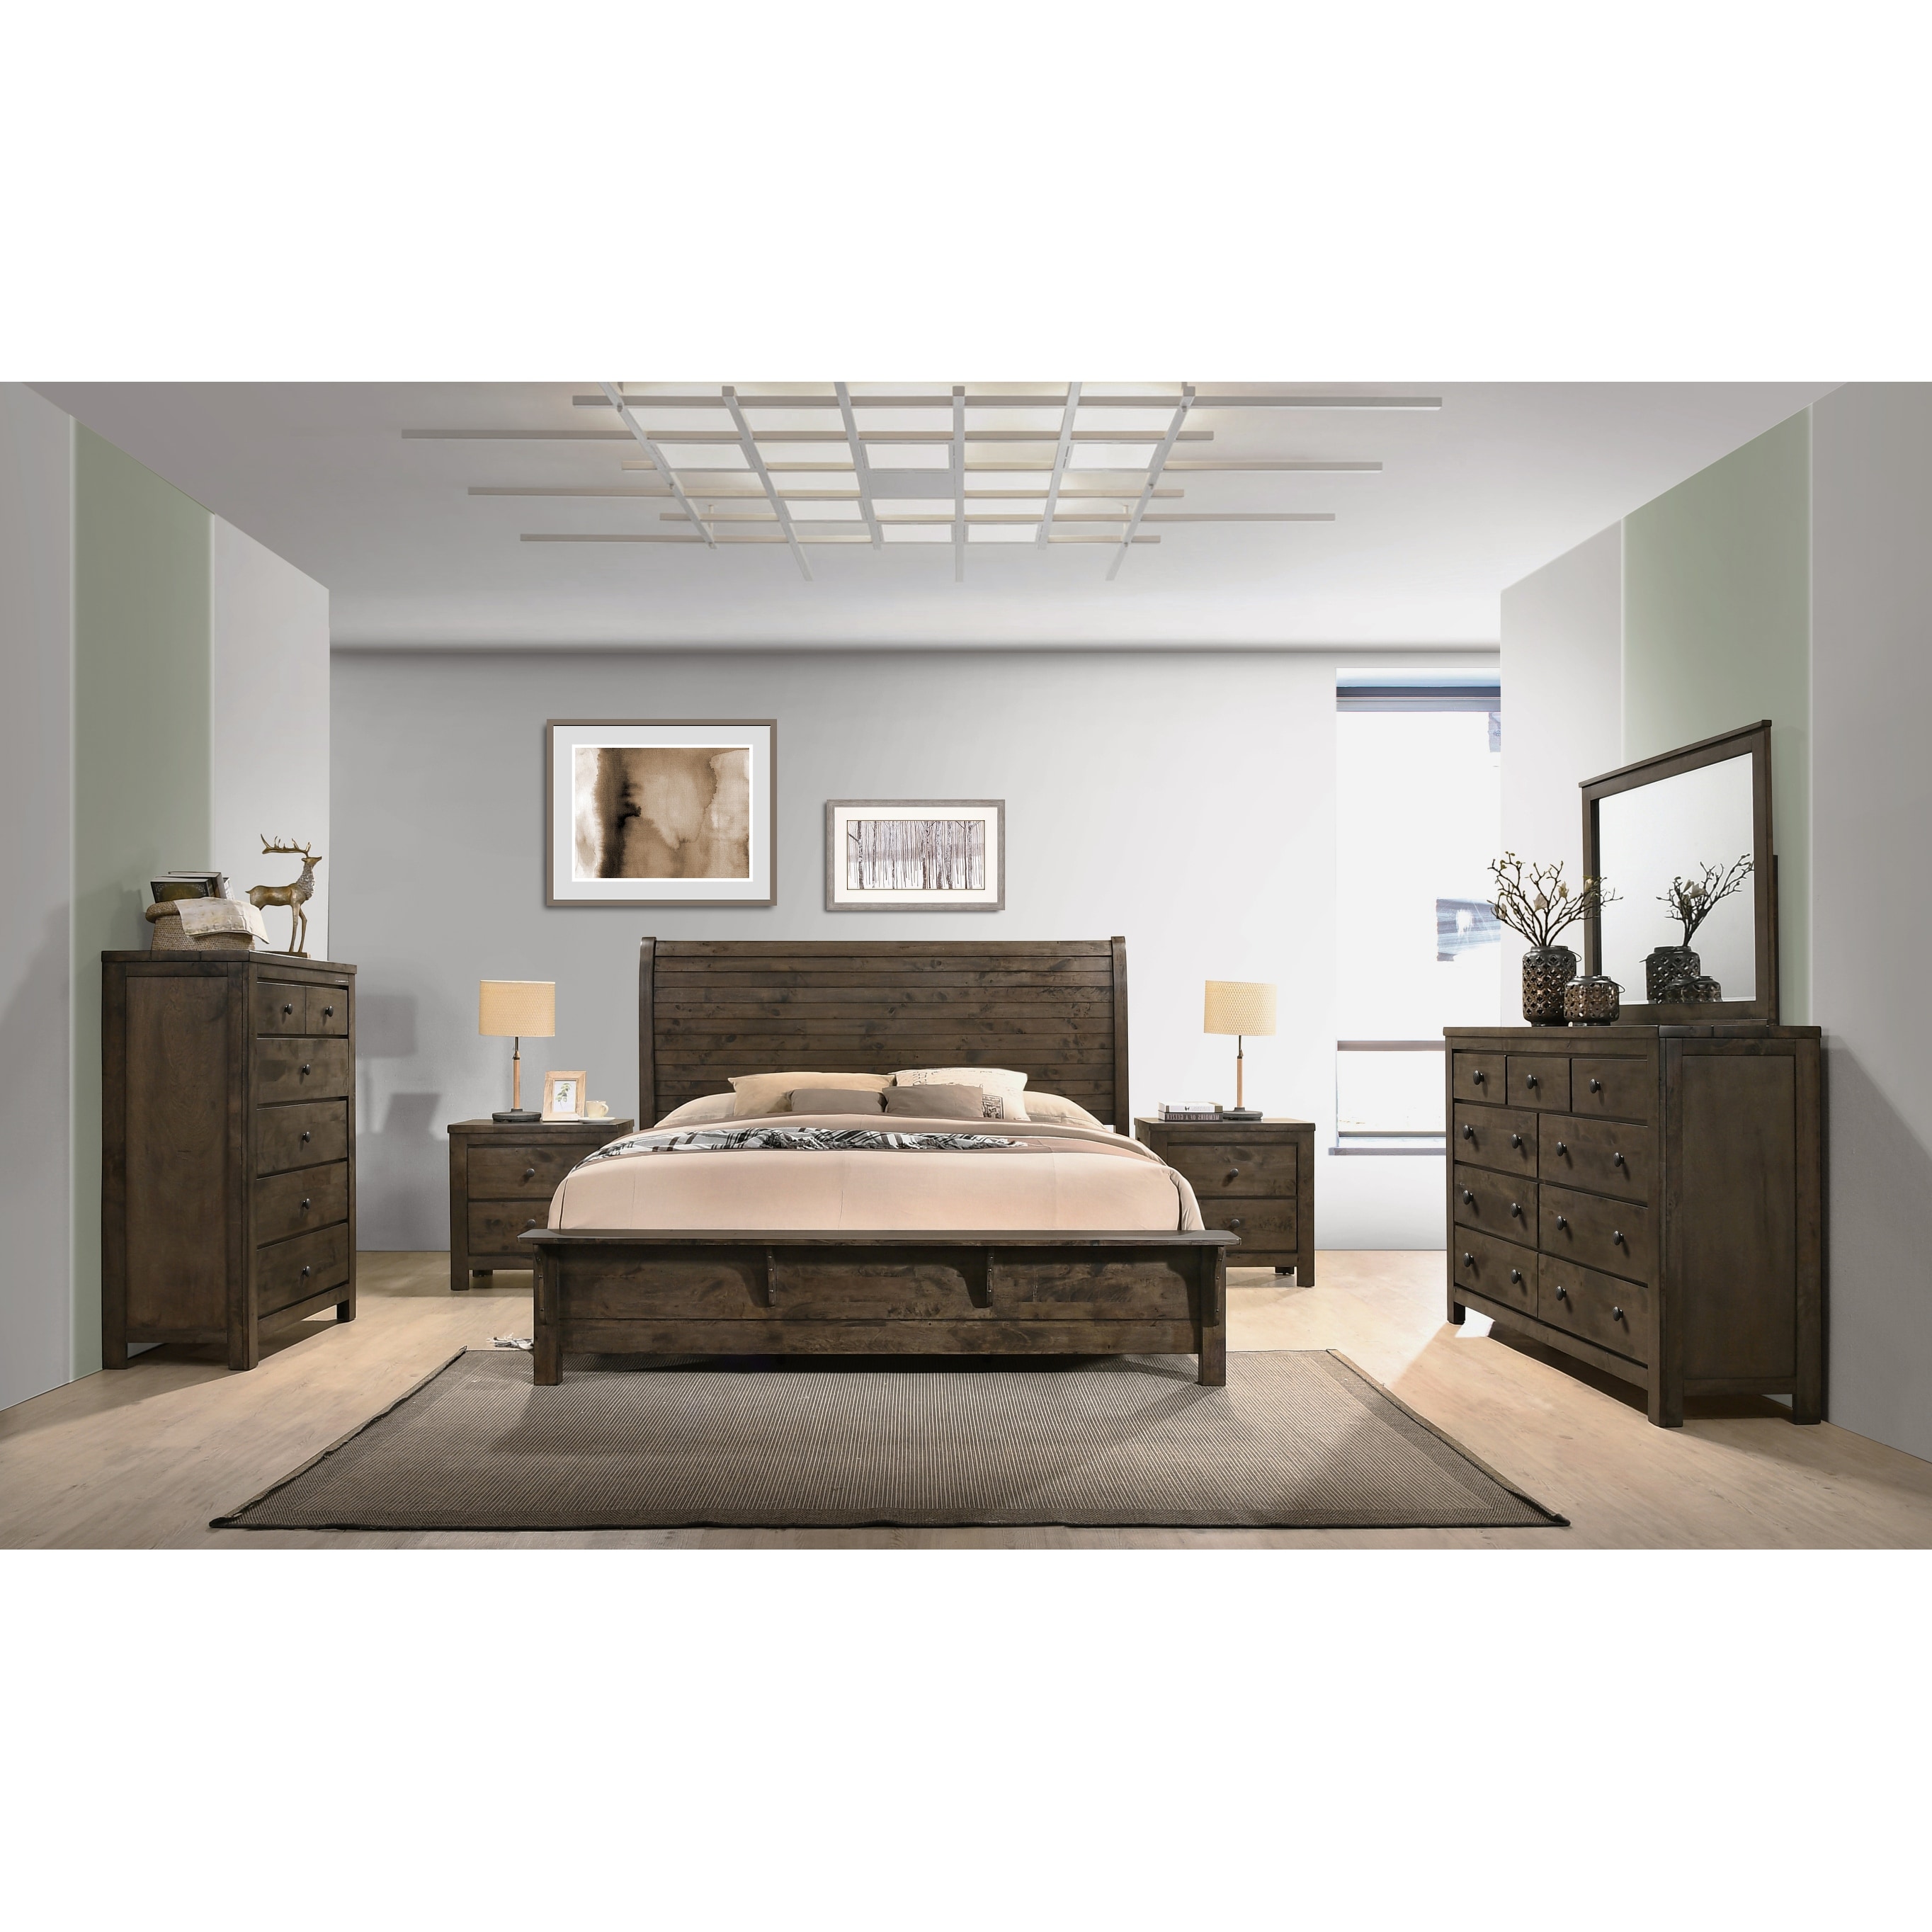 https://ak1.ostkcdn.com/images/products/is/images/direct/0fda5056a9582b6838bec6b1559c23ed32610e0d/Roundhill-Furniture-Pavita-Classic-Grey-Finish-6-piece-Sleigh-Bedroom-Set.jpg